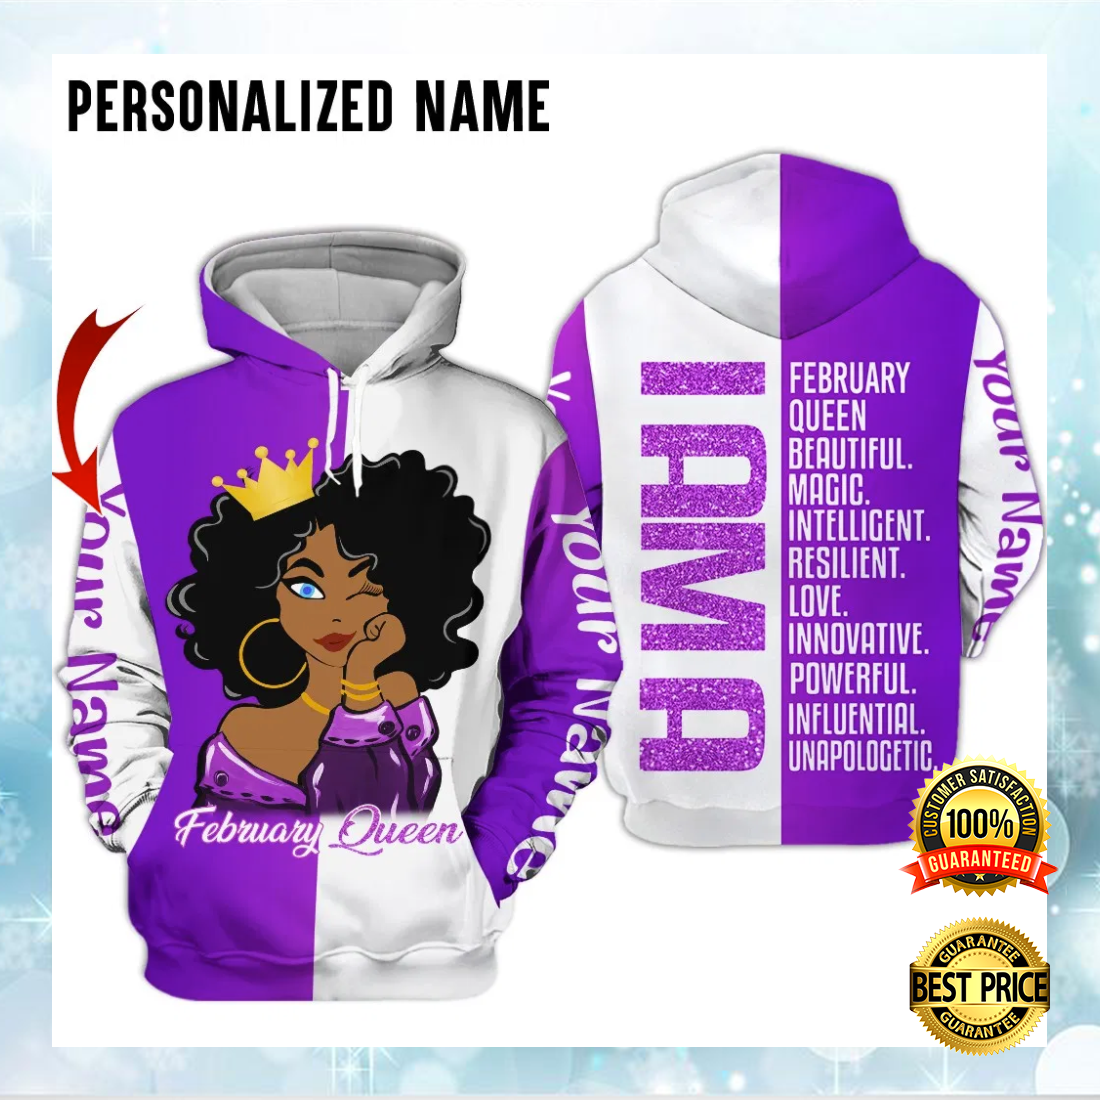 Personalized i am a february queen beautiful magic intelligent all over printed 3D hoodie